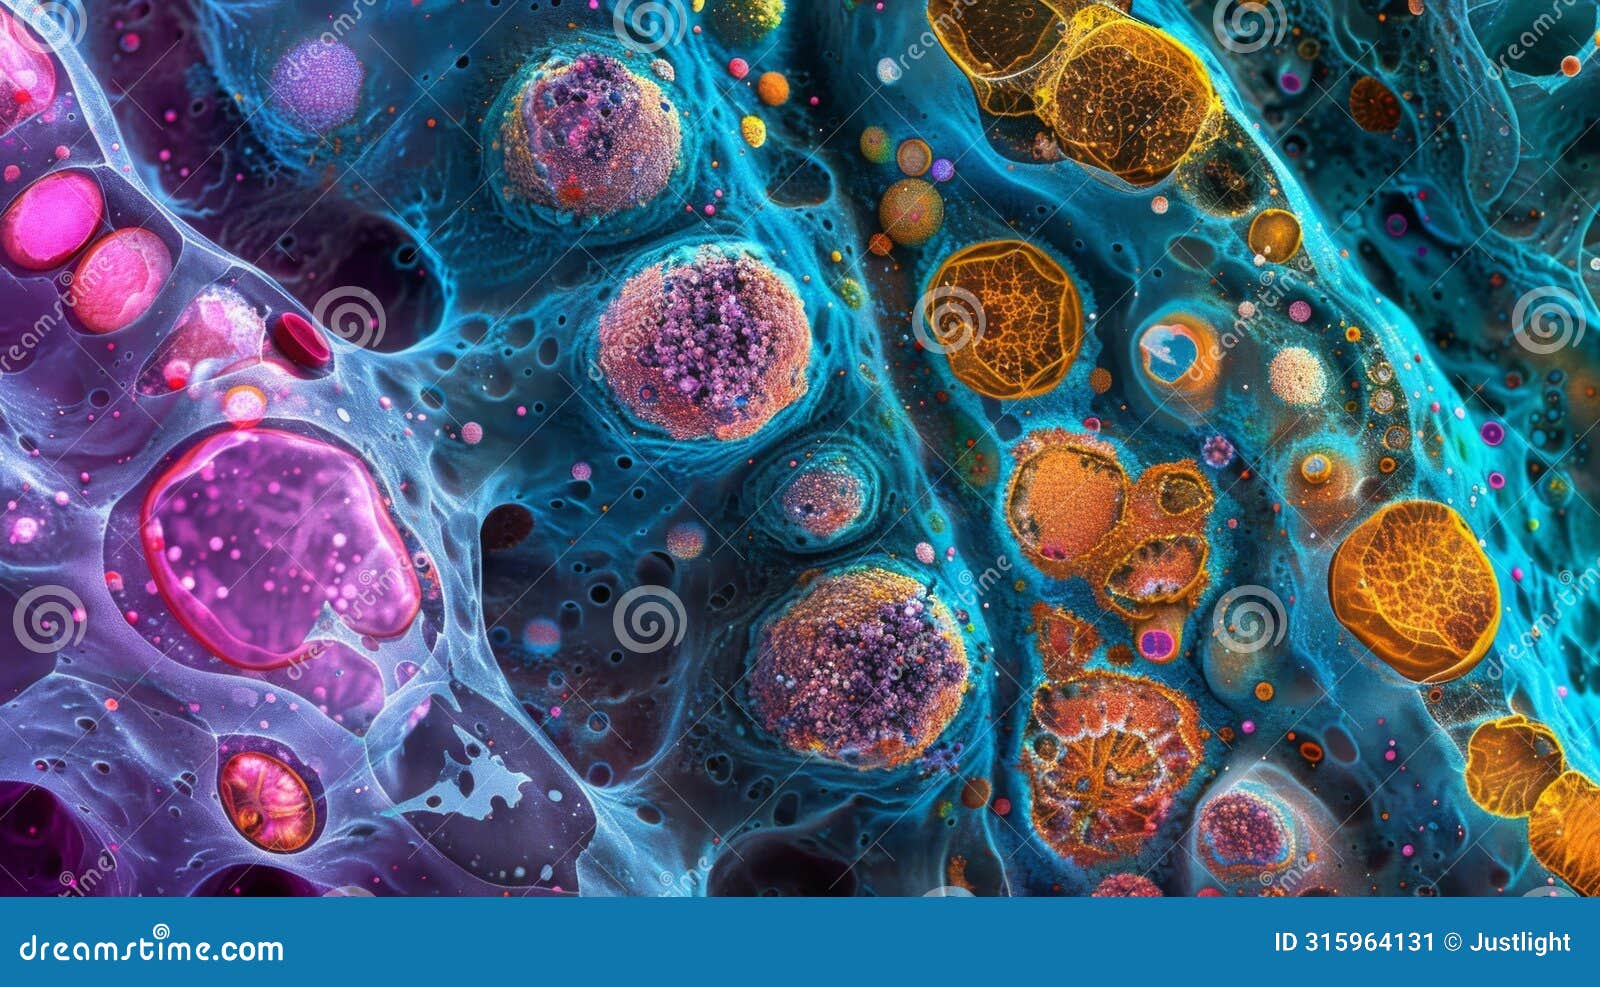 a crosssection of a bone cell revealing its dense and organized structure with brightly colored organelles such as